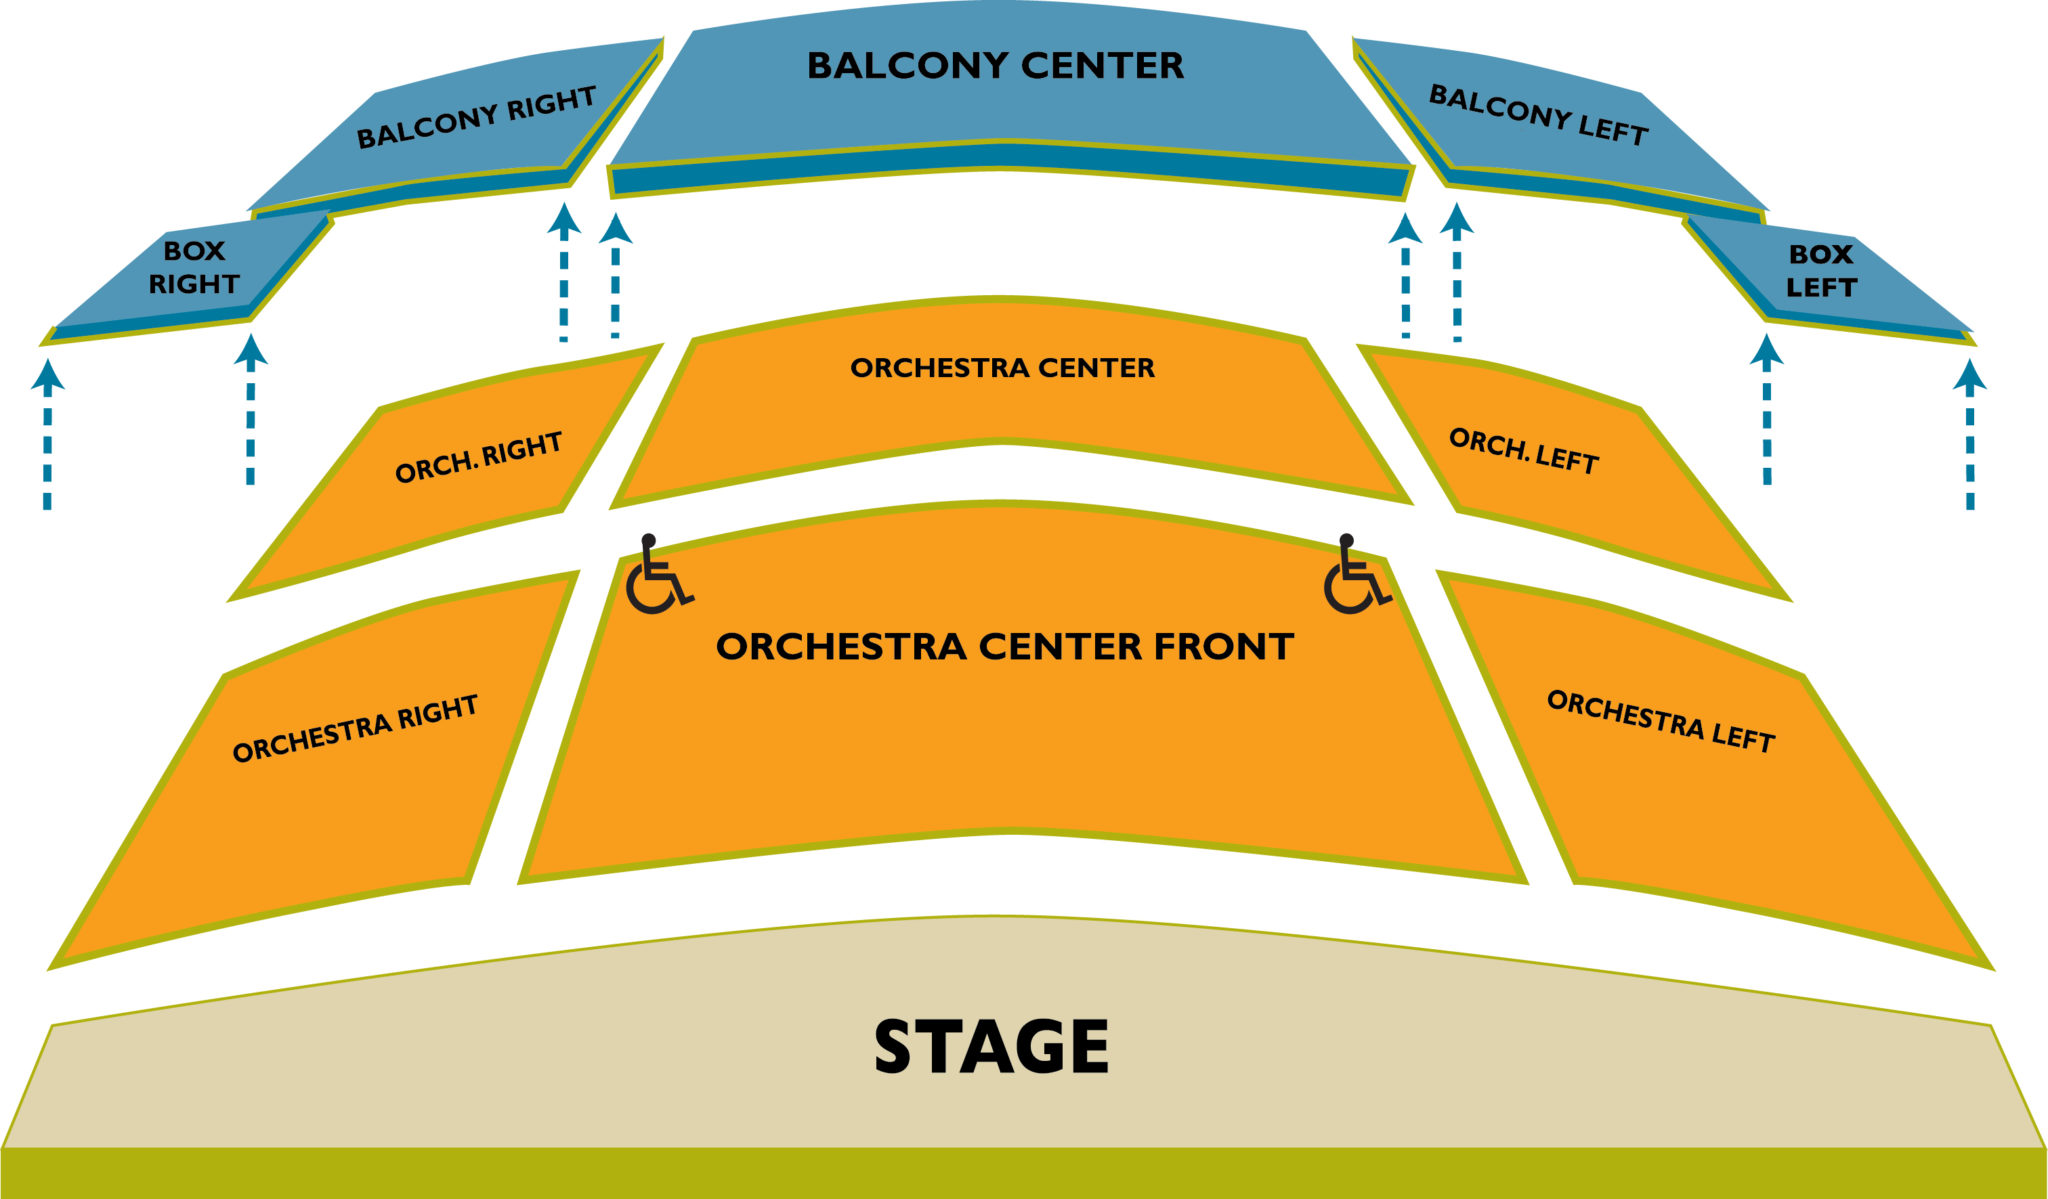 Venue Seating Charts - Wortham Center for the Performing Arts